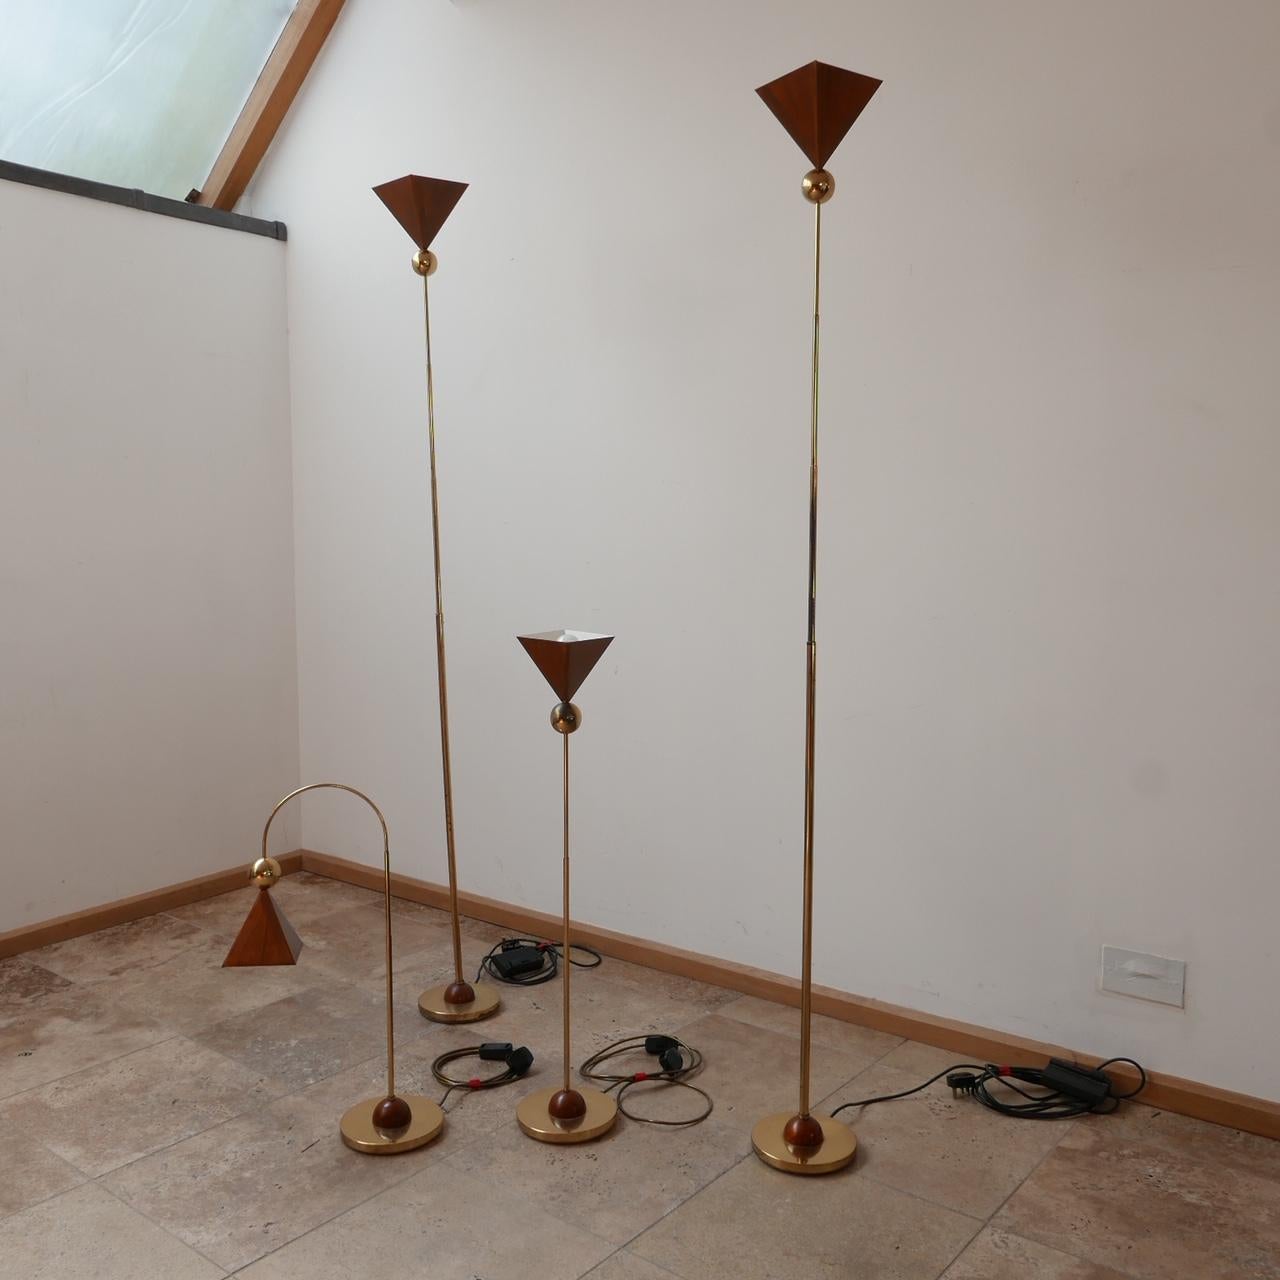 A set of four matching mid-century lights. 

Two tall floor lights, a straight table lamp, and a single curved table lamp. 

Brass and copper. 

Italy, c1980s. 

Price is for the set. 

Dimensions: floor lamps: 179 height x 19 diameter in